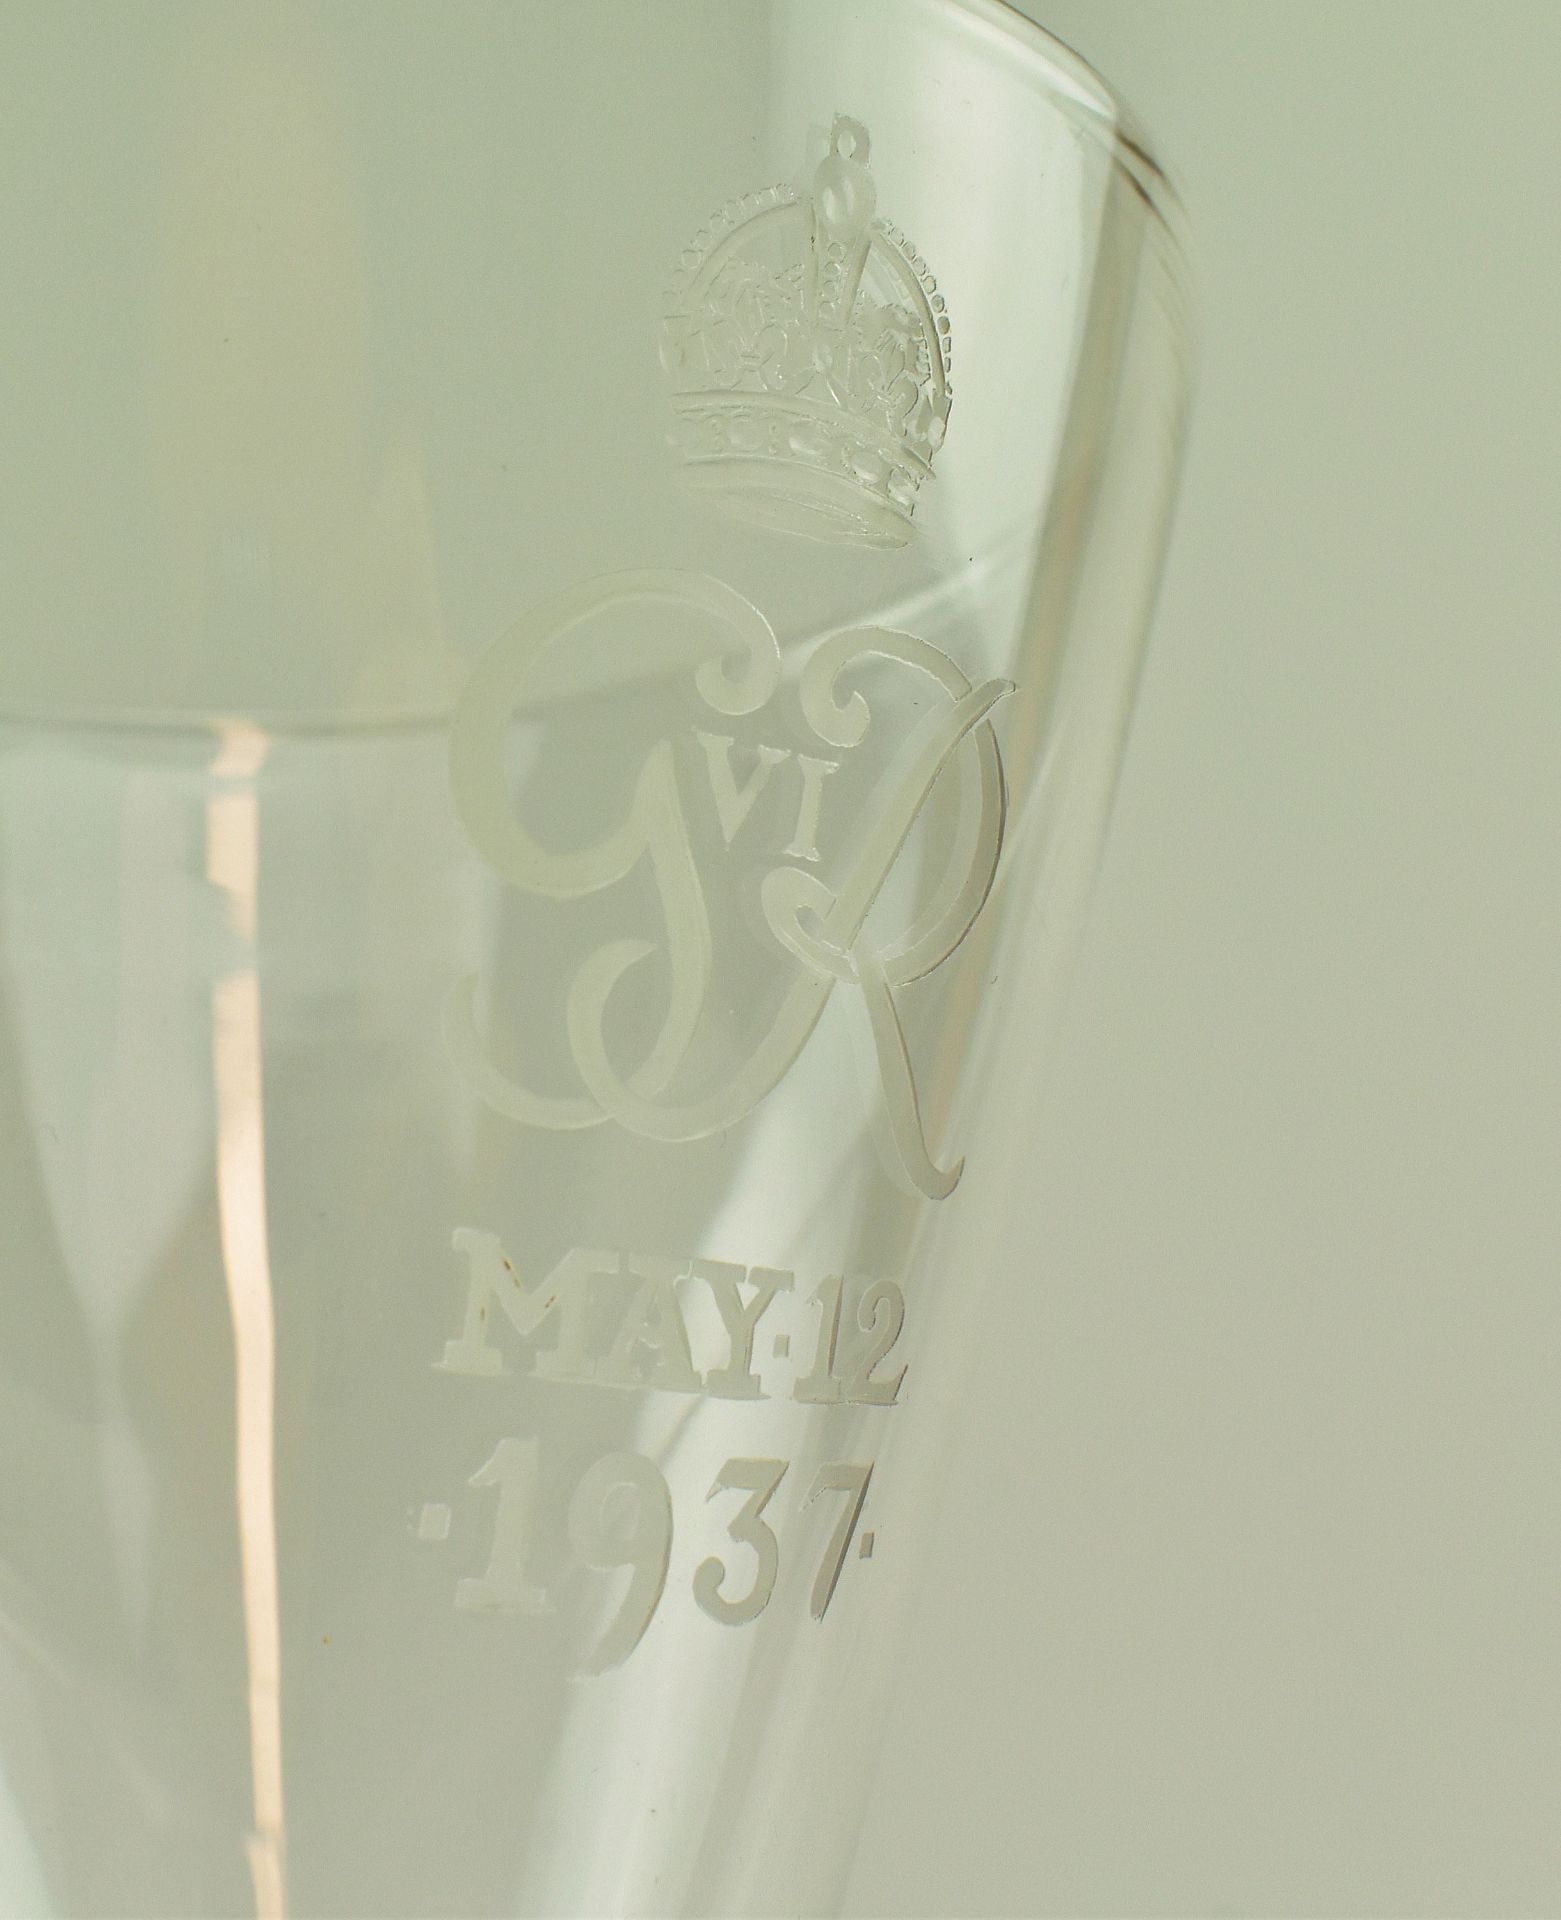 STUART GLASS - 1937 COMMEMORATIVE ETCHED GLASS CHALICE - Image 2 of 7